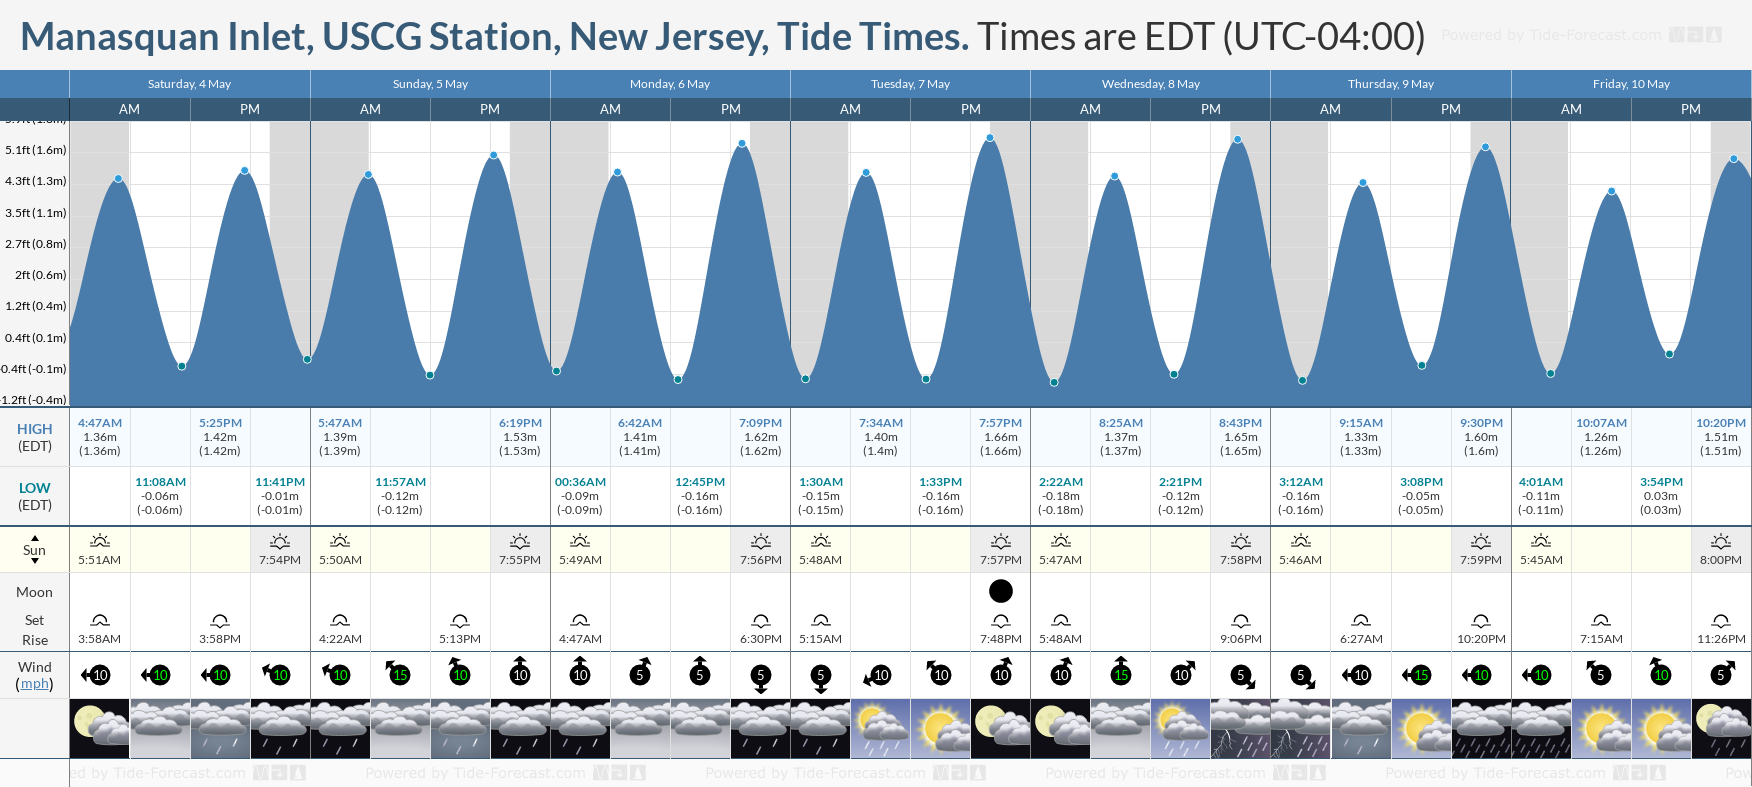 Manasquan Inlet, USCG Station, New Jersey Tide Chart including high and low tide tide times for the next 7 days